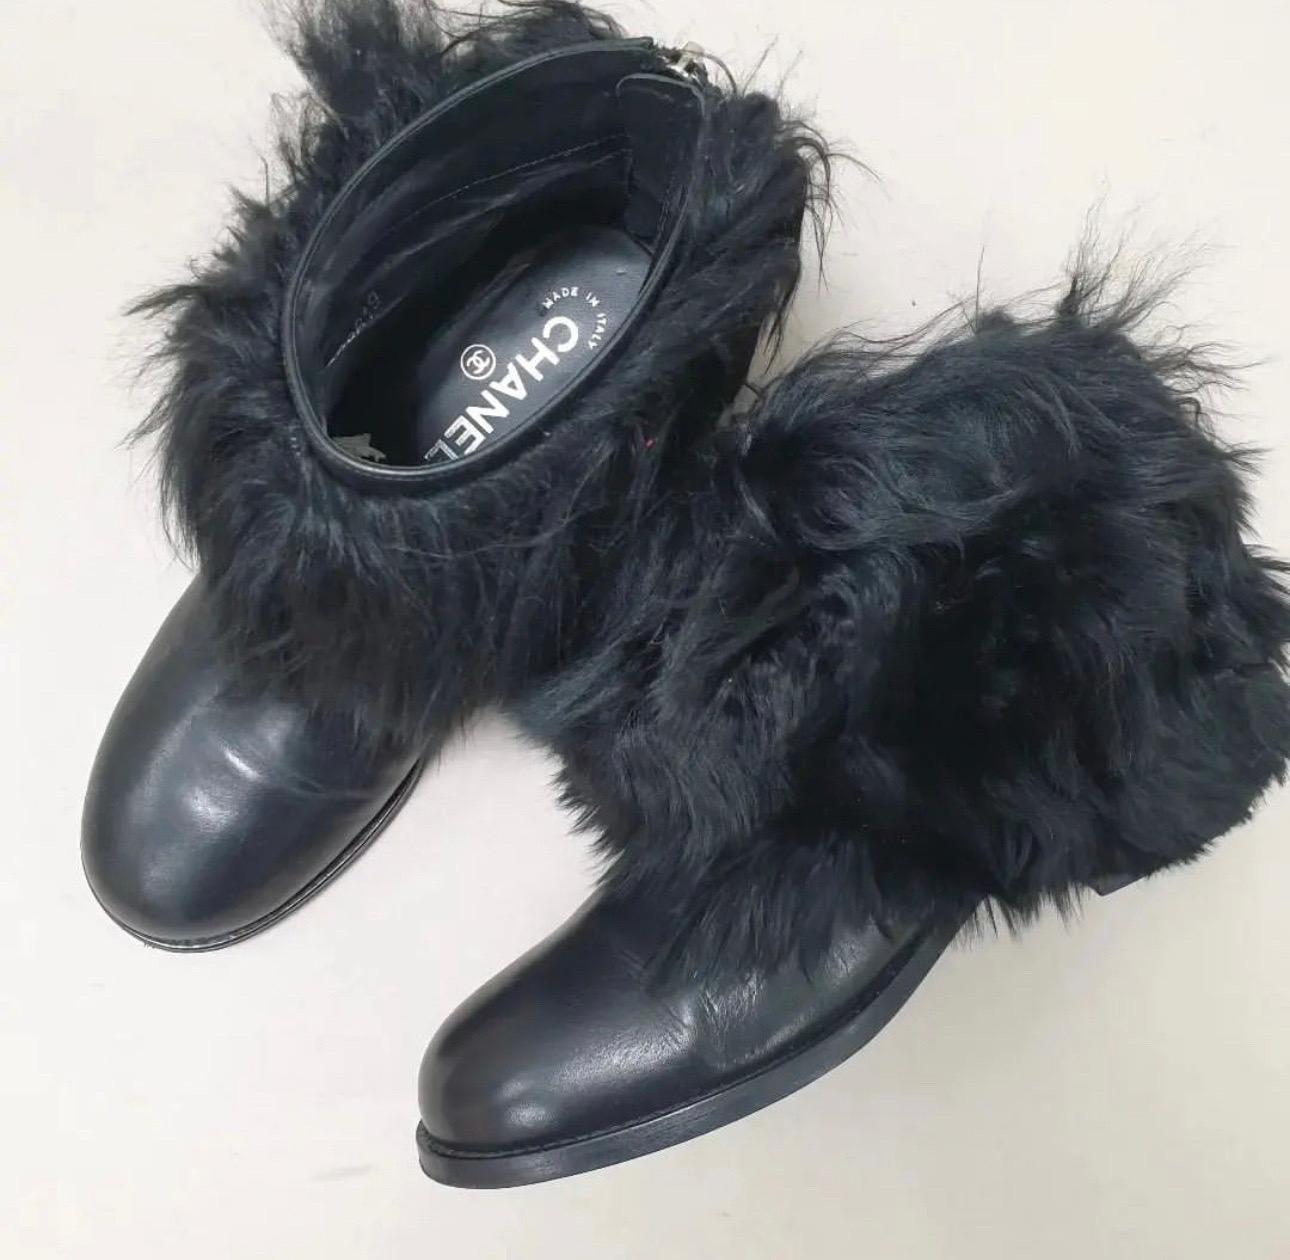 
Sz.37

Boot type shoes
Brand: Chanel
Model: FAUX FUR
Year of manufacture : 2012
Very good condition.  Signs of wear seen on pics.
No box. No dust bag